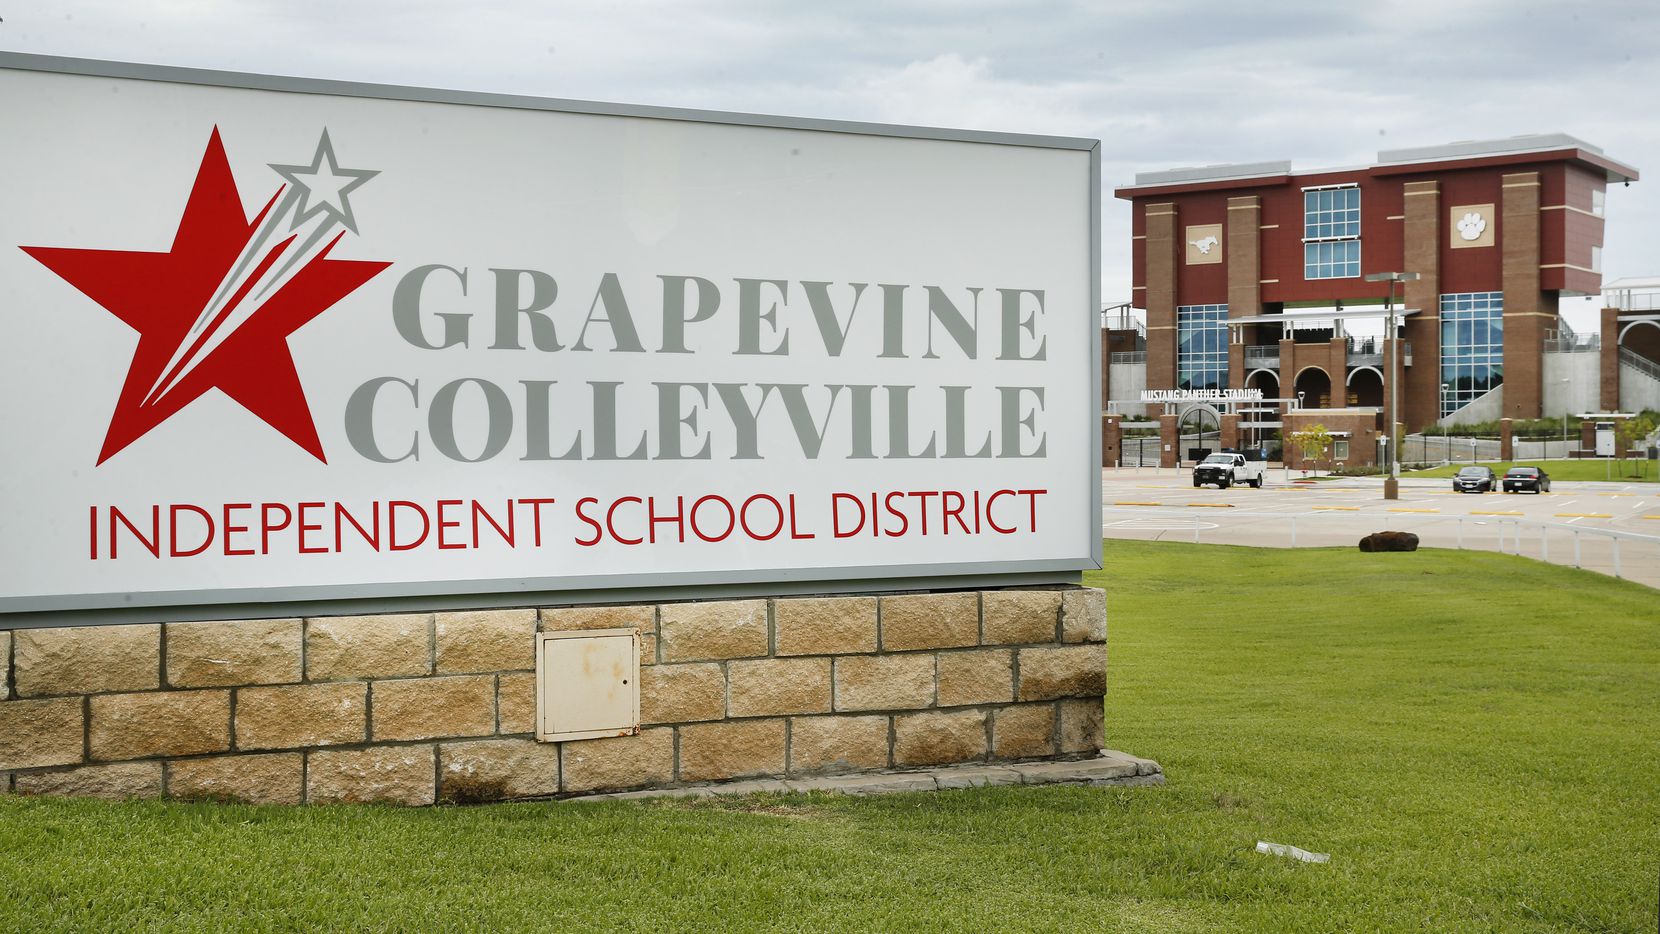 Grapevine-Colleyville ISD has announced changes in its quarantine protocols for COVID-19.